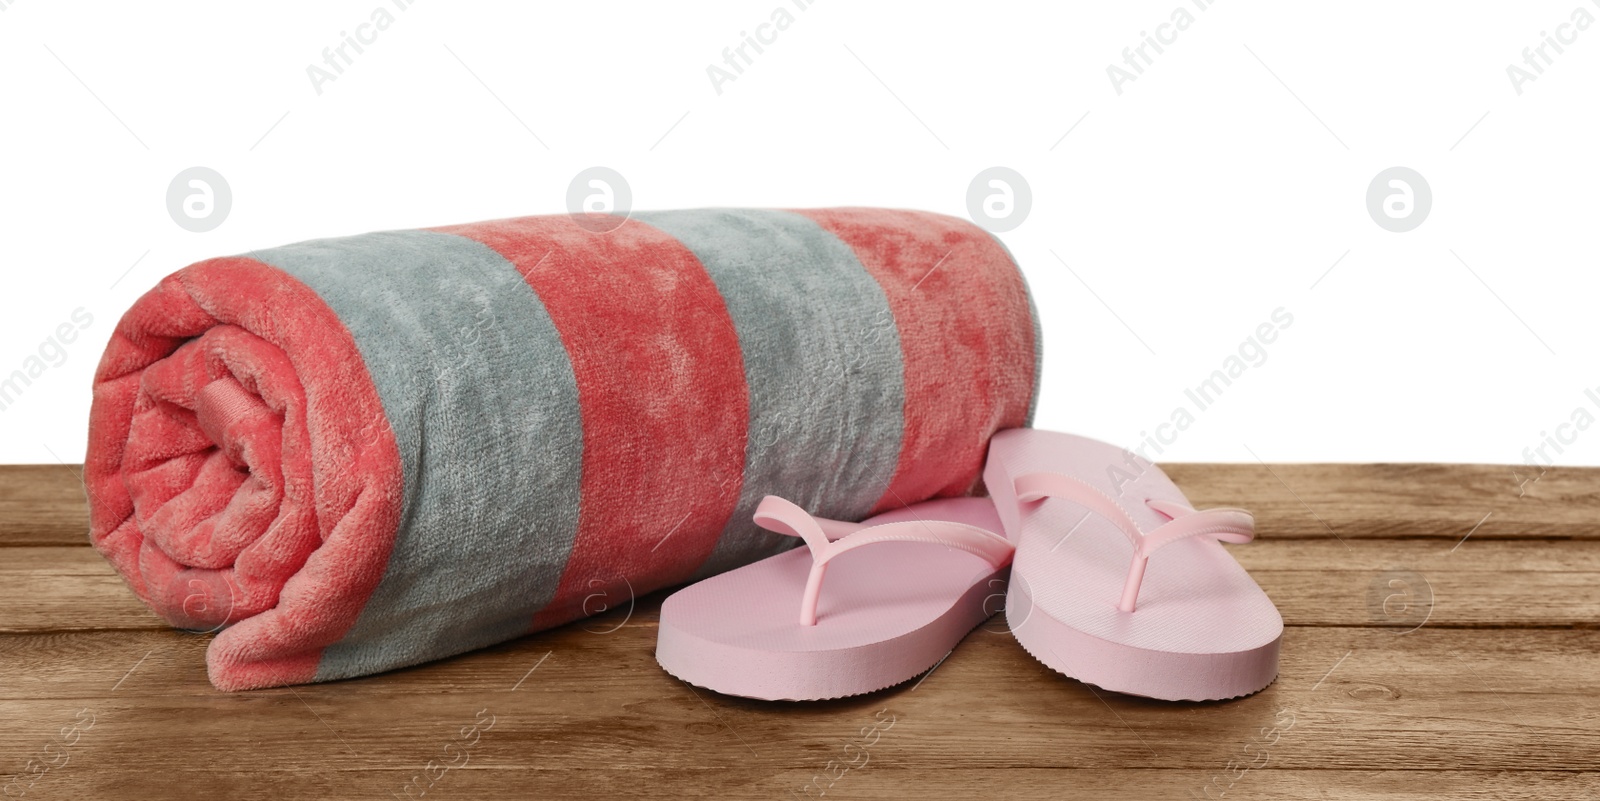 Photo of Beach towel and flip flops on wooden surface against white background